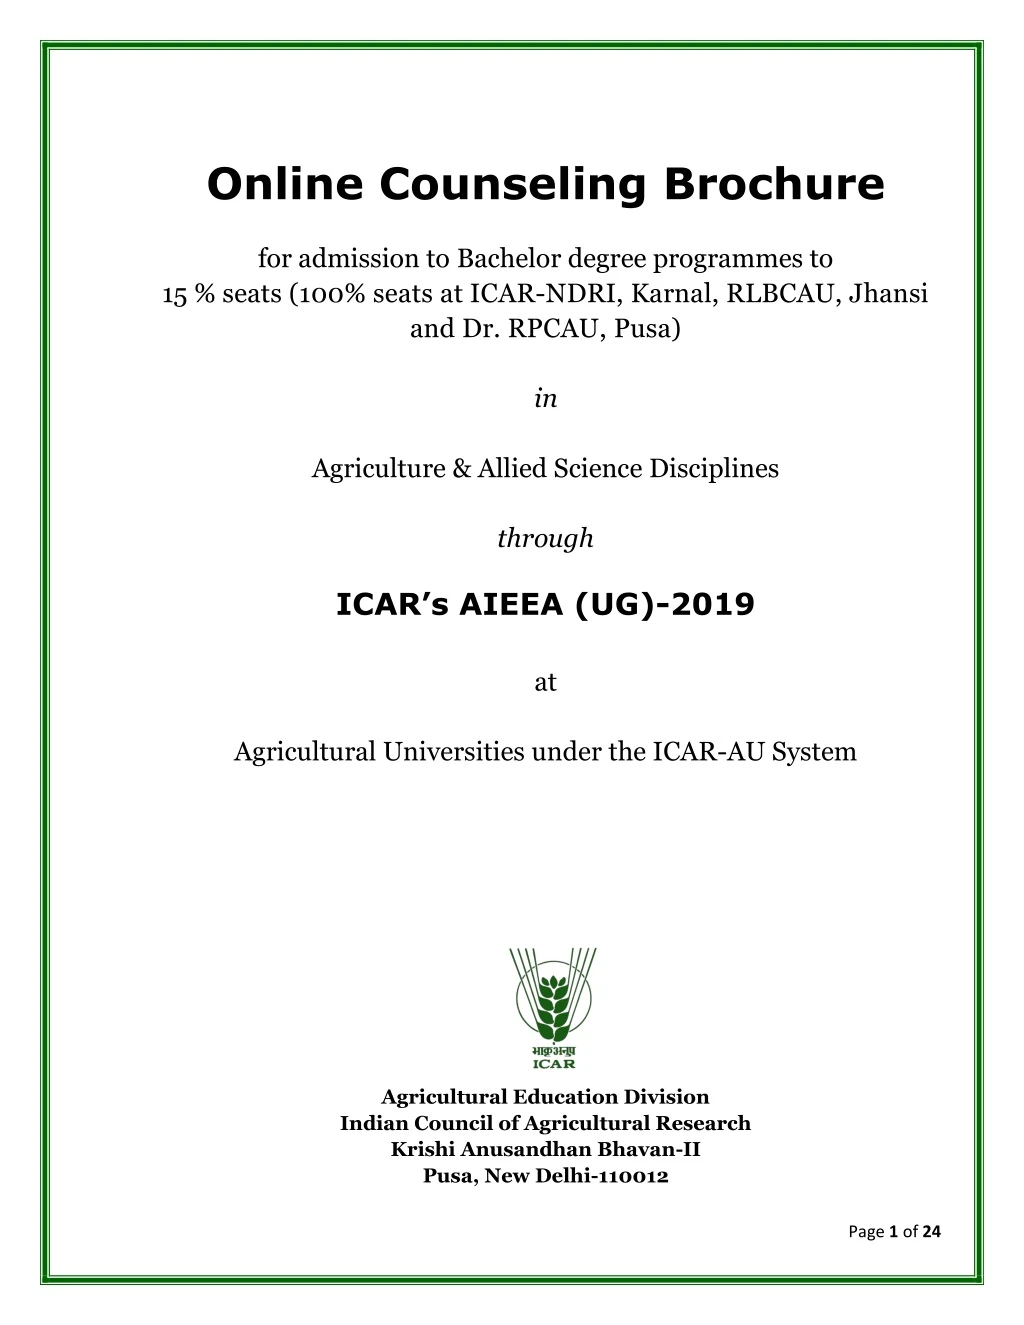 online counseling brochure for admission